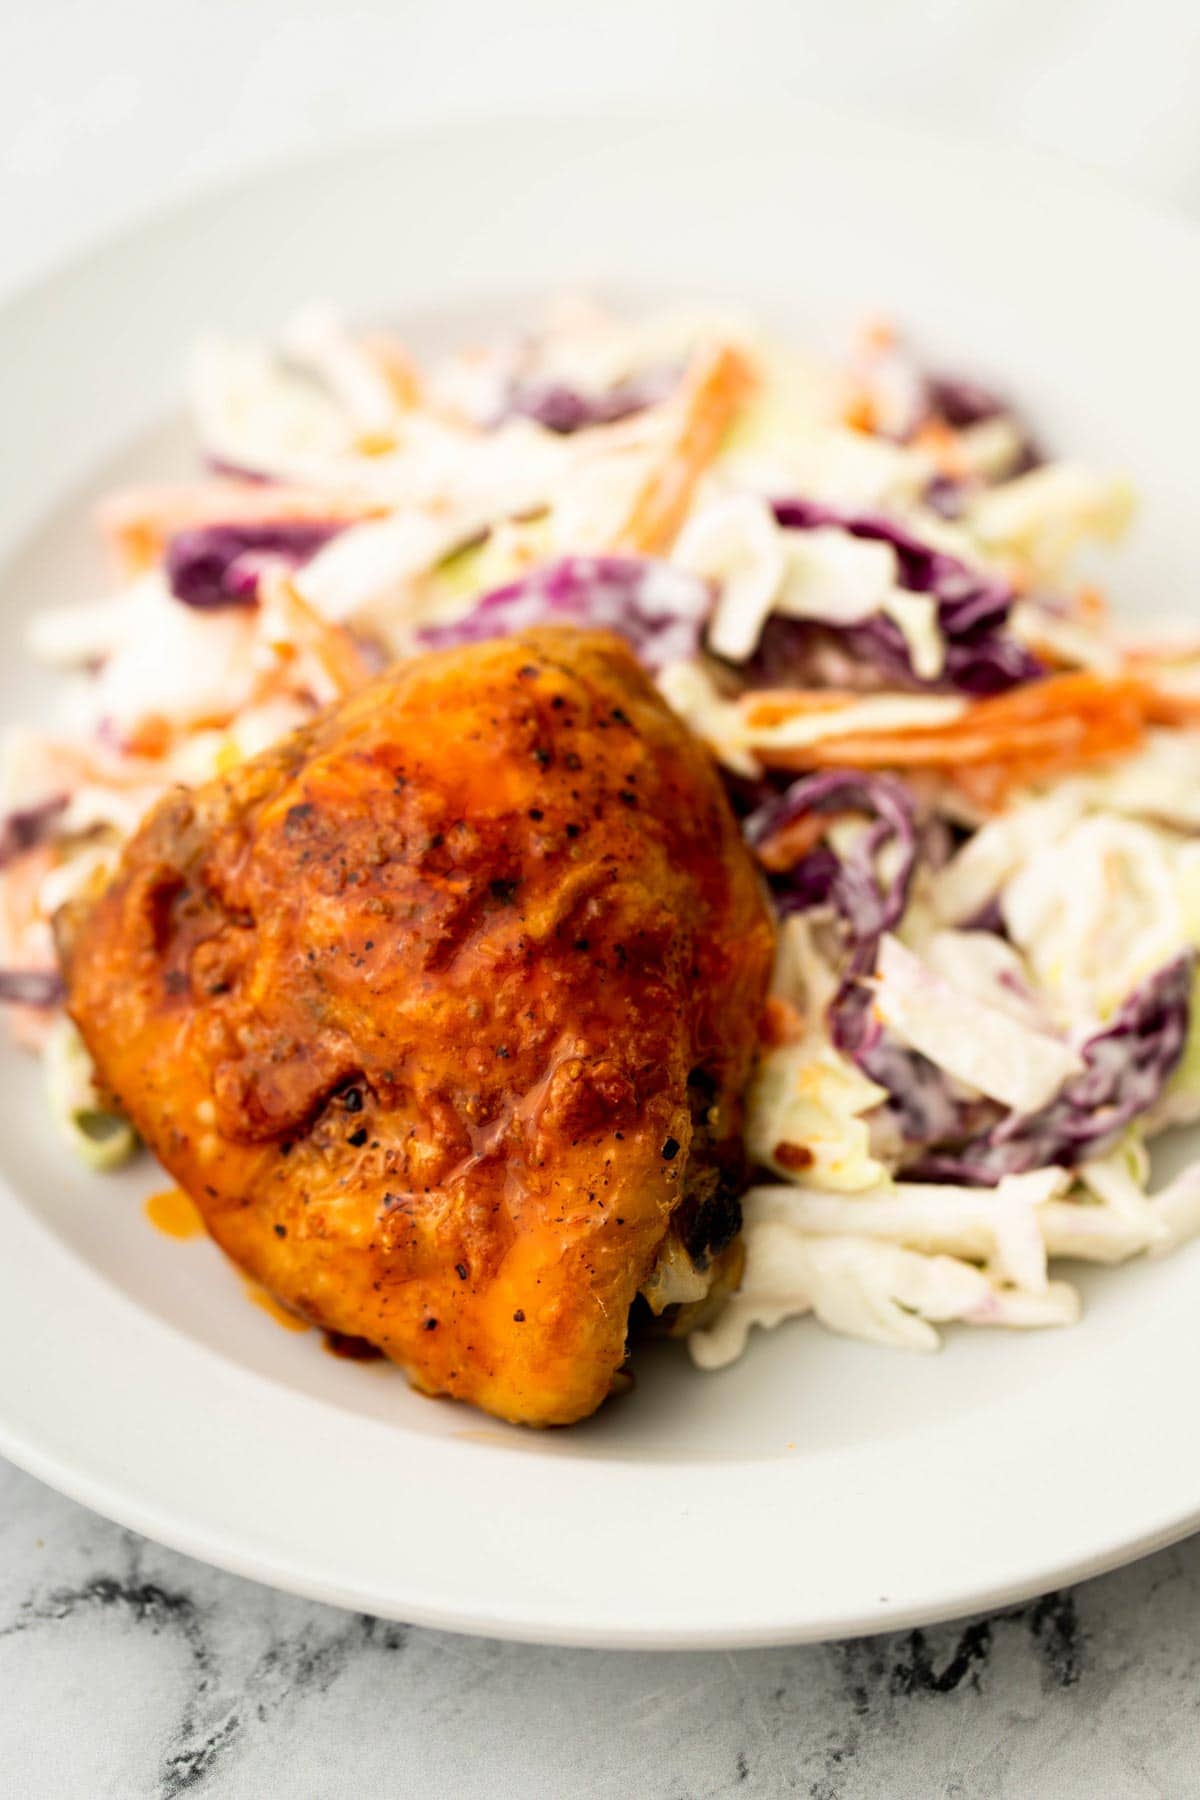 A chicken thigh in buffalo sauce on a white plate with coleslaw.